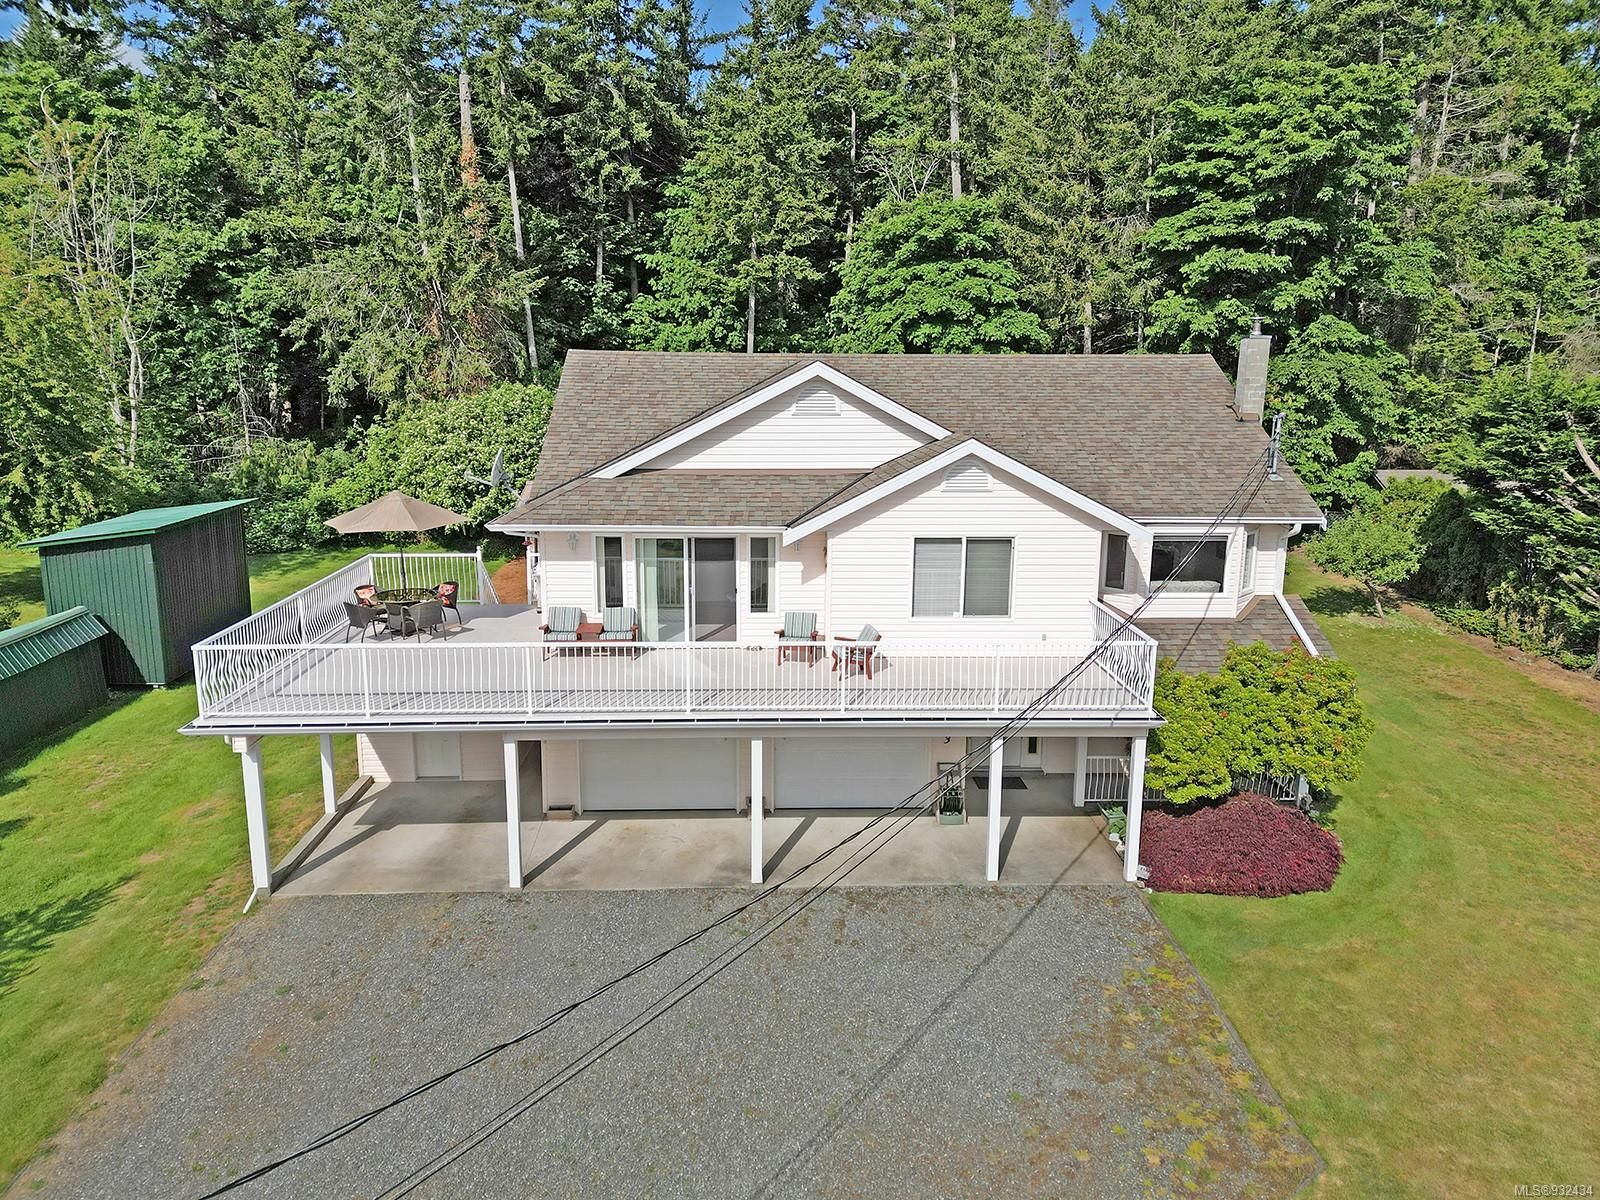 Privacy, space to breathe! Tucked away on over 1/3 acre,backing onto park w/ocean views